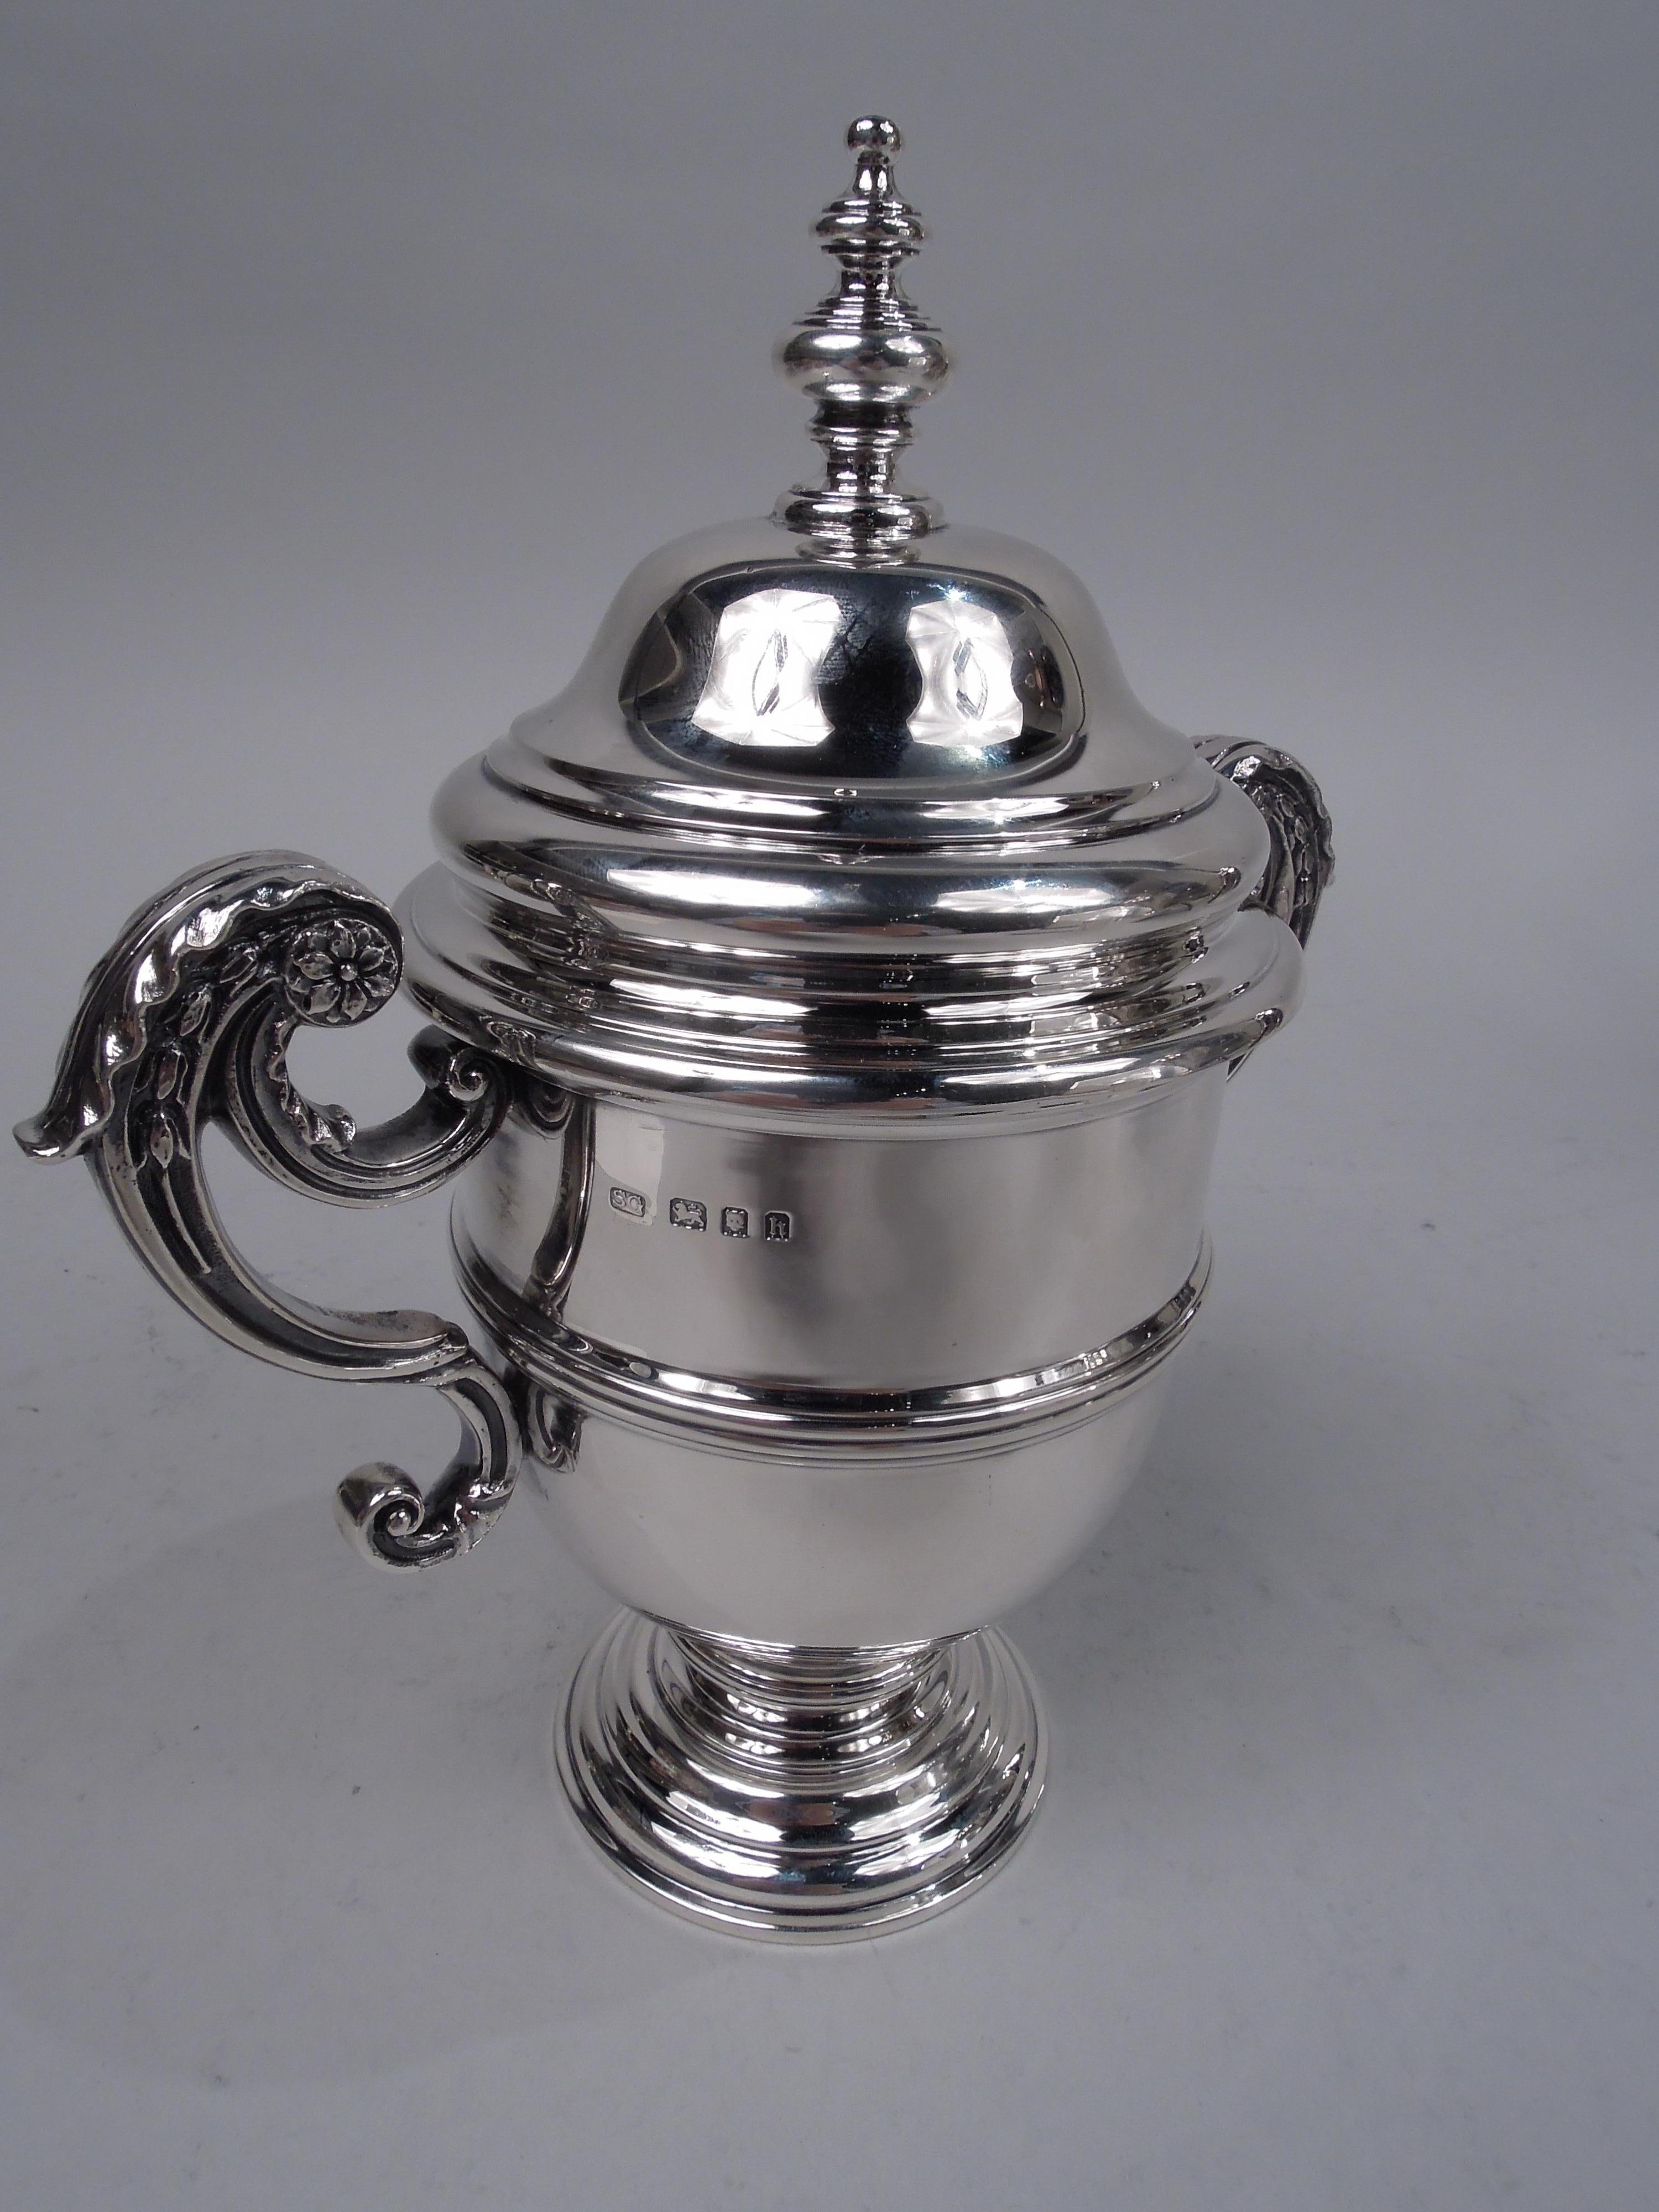 George V sterling silver trophy cup. Made by Garrard & Co. Ltd in London in 1923. Girdled urn with leaf-capped double-scroll flying side handles and knopped support; stepped and domed foot. Cover domed with vasiform finial. Fully marked. Weight: